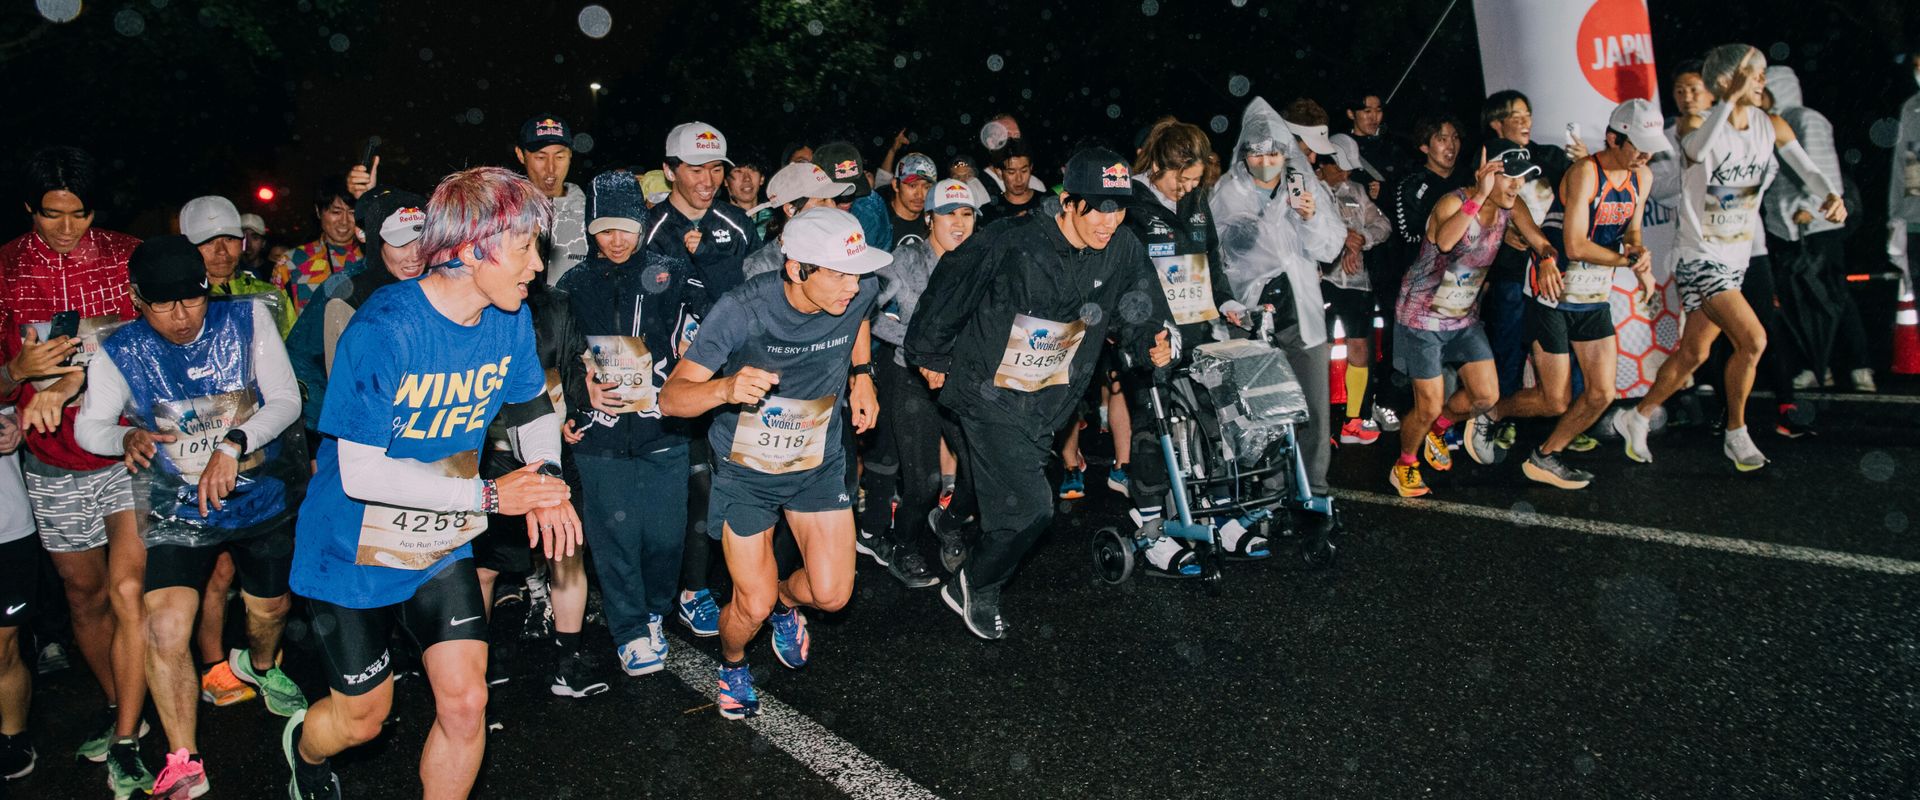 Wings for Life World Run 2